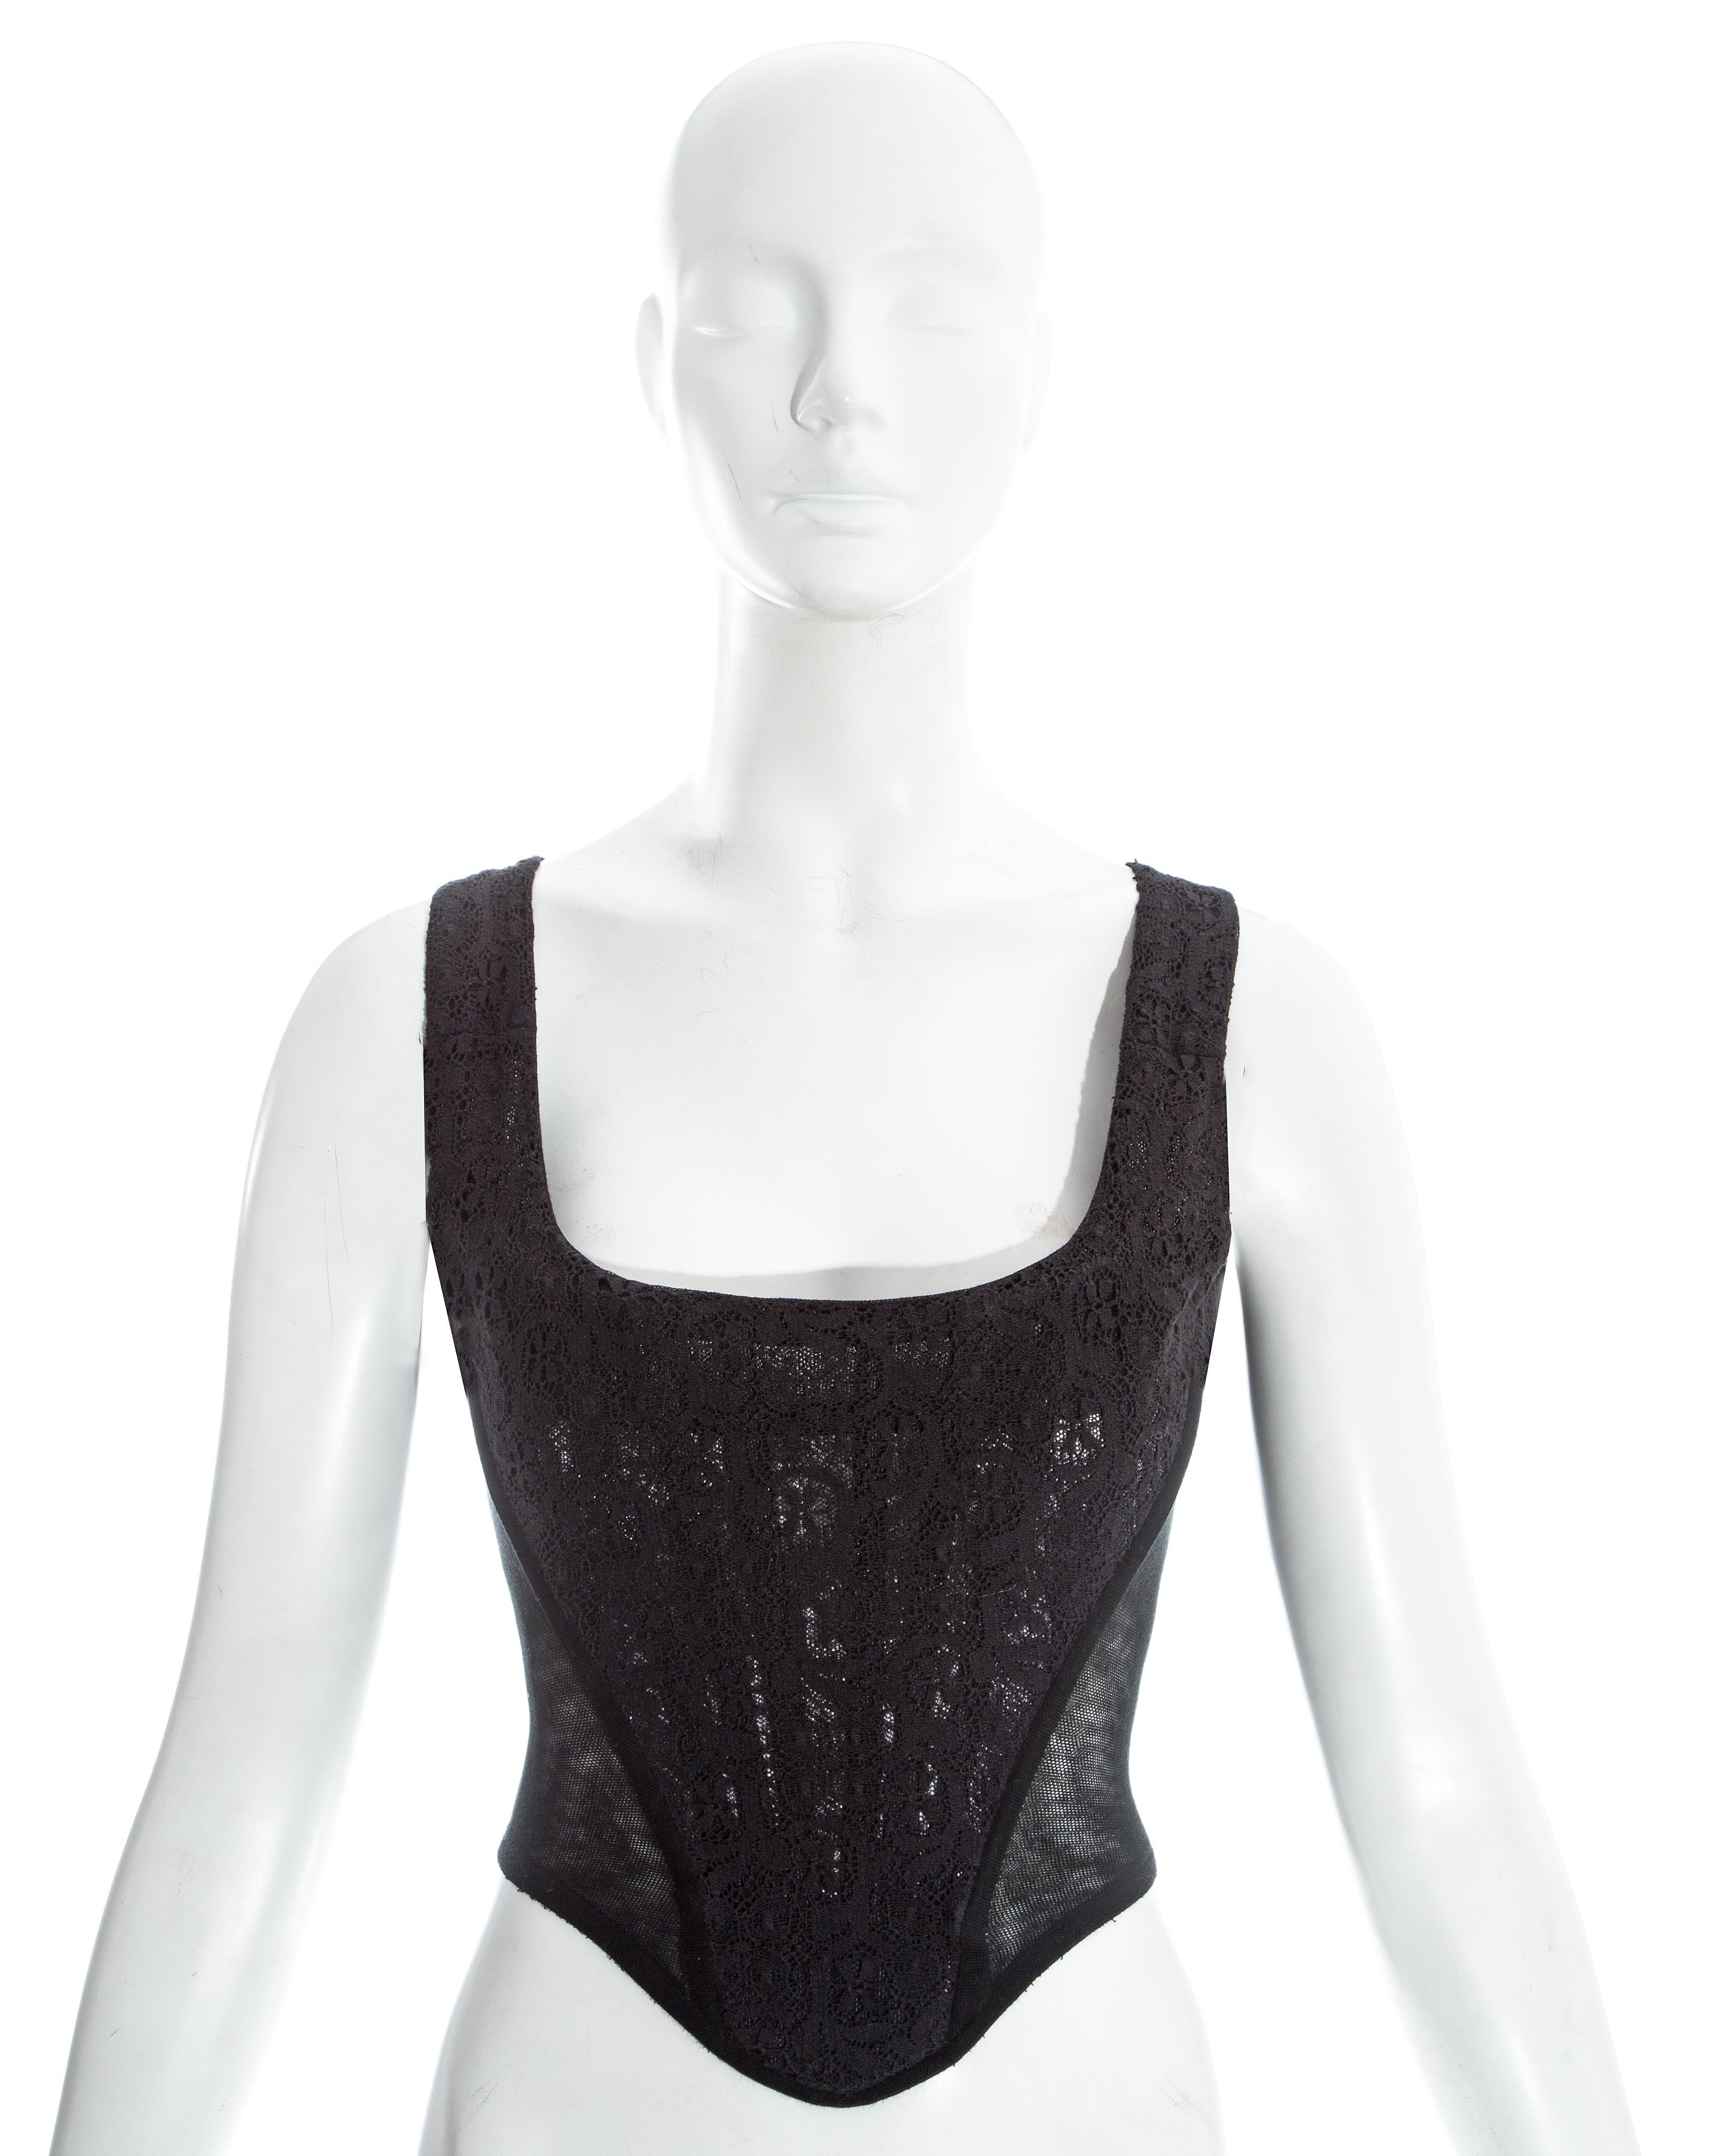 Vivienne Westwood; black lace corset with mesh side panels and built in boning. Designed to cinch the waist and push the breasts up.

Fall-Winter 1994